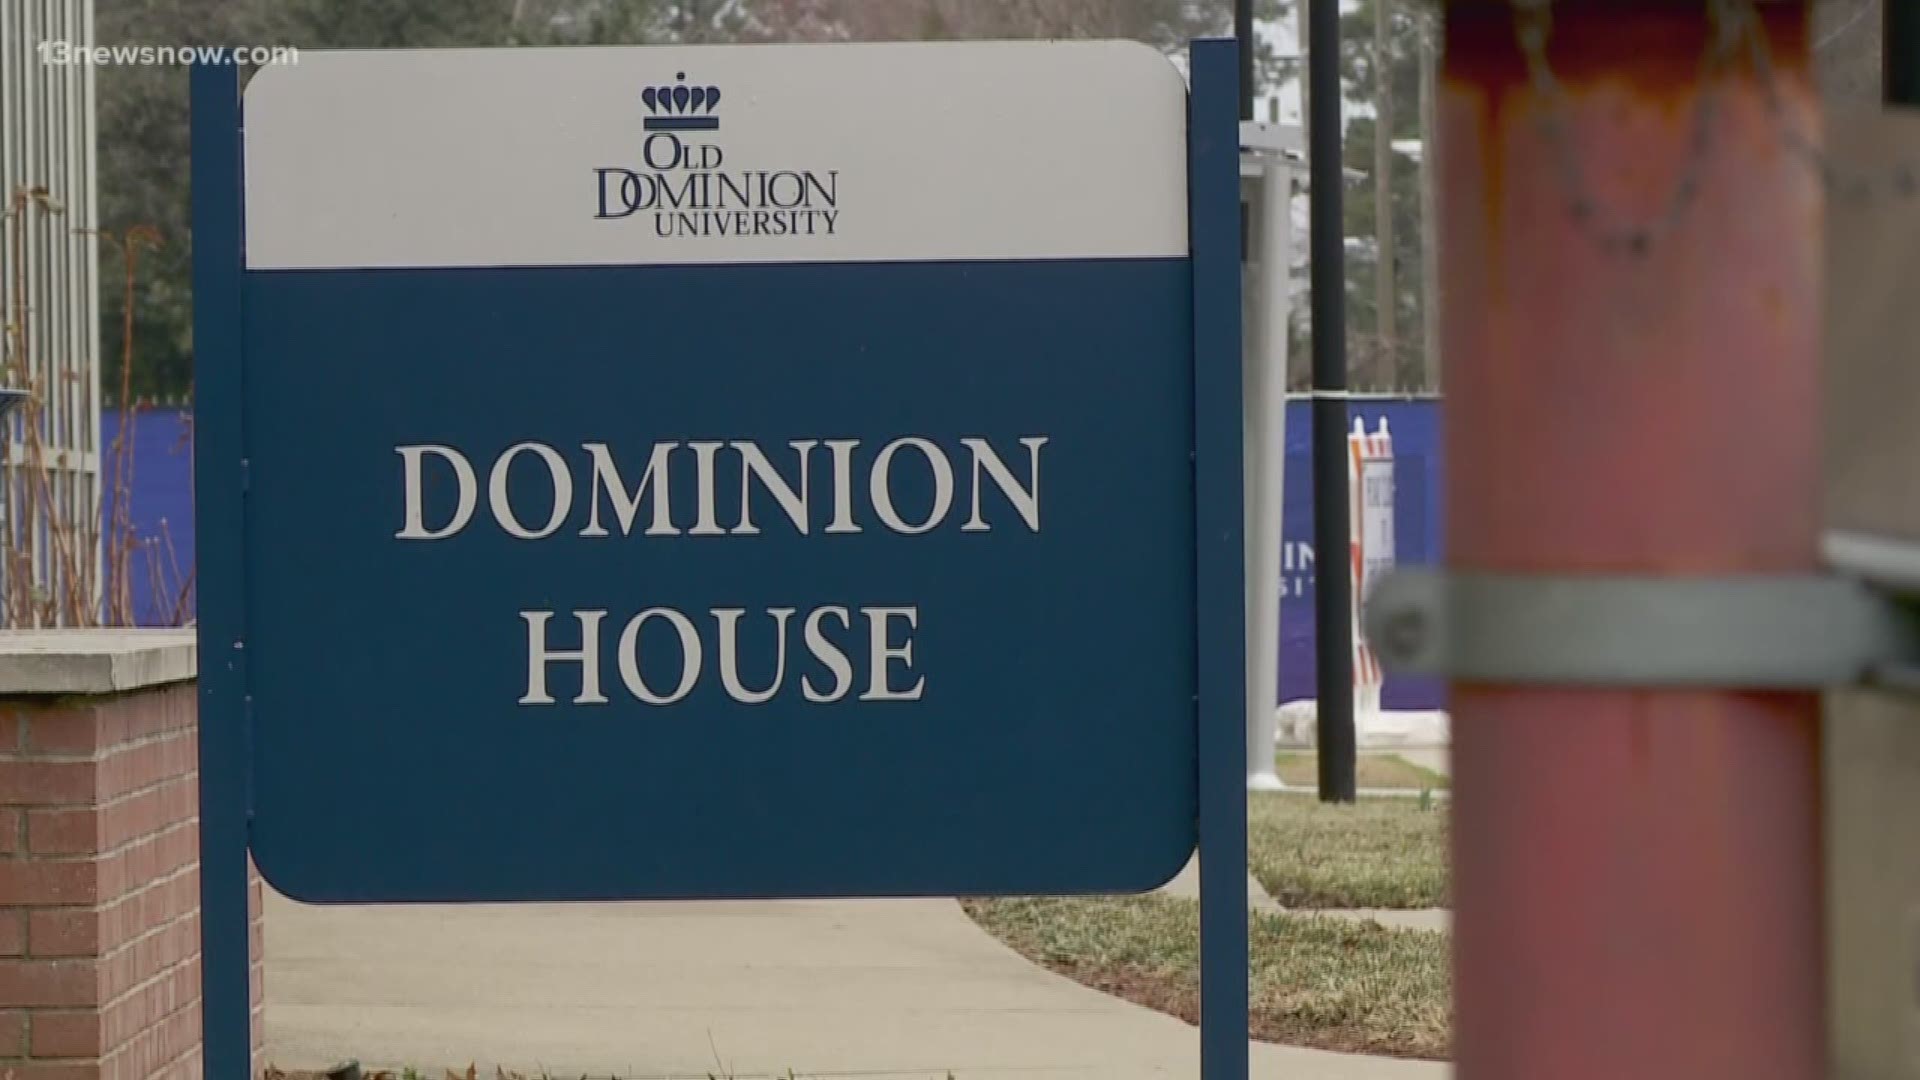 After two men broke into an Old Dominion University dorm room with a gun, campus police are reminding students to not let people follow them into a building.